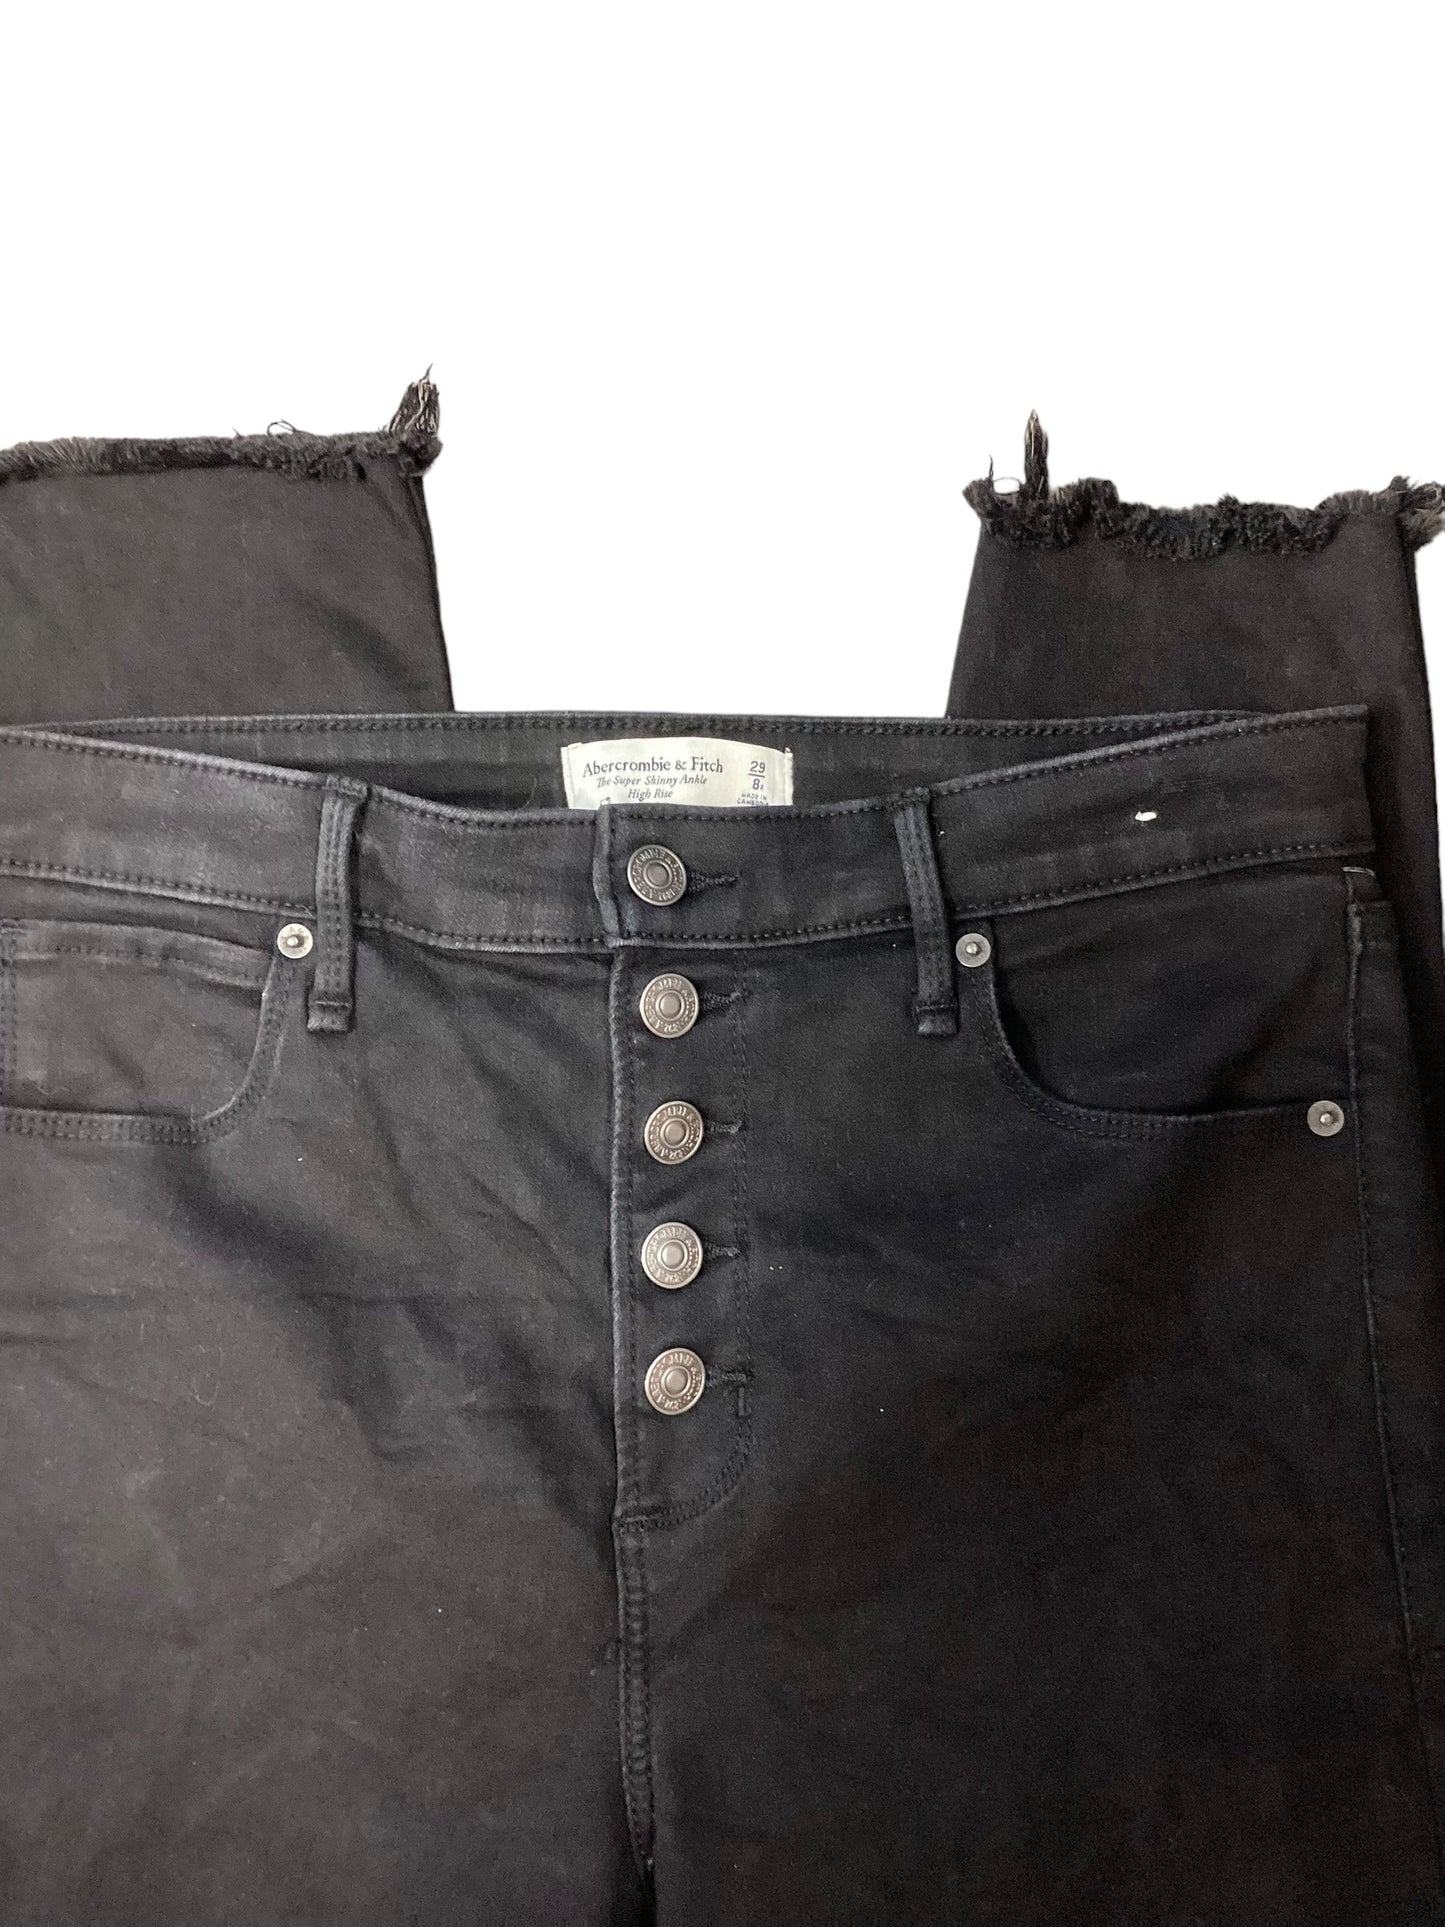 Black Denim Jeans Skinny Abercrombie And Fitch, Size 8